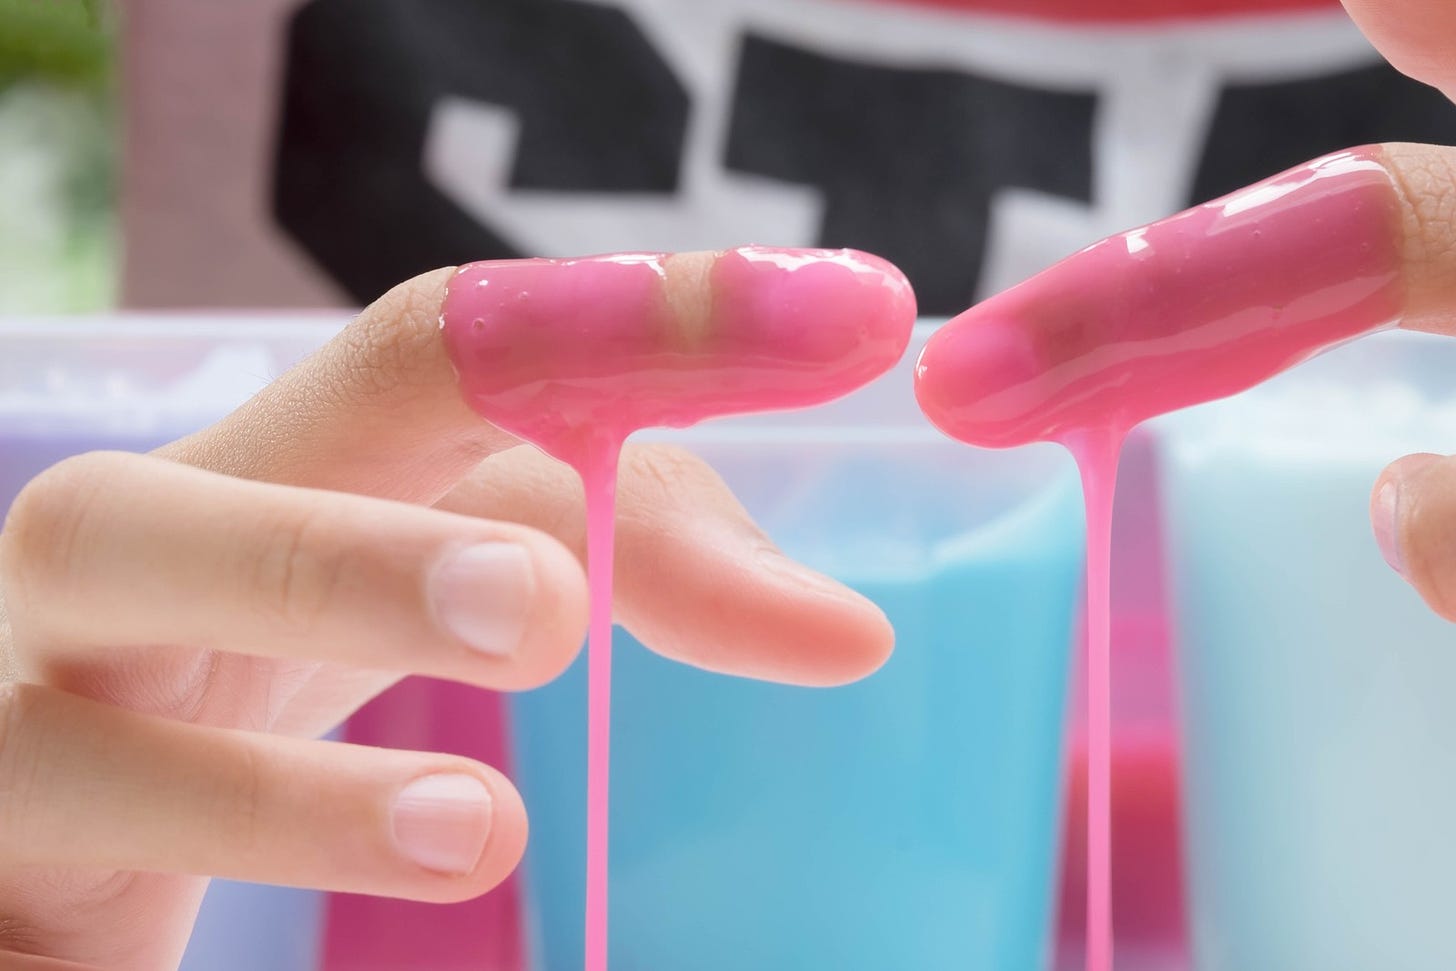 Why Making Slime Is Sending Kids To The Doctor's Office